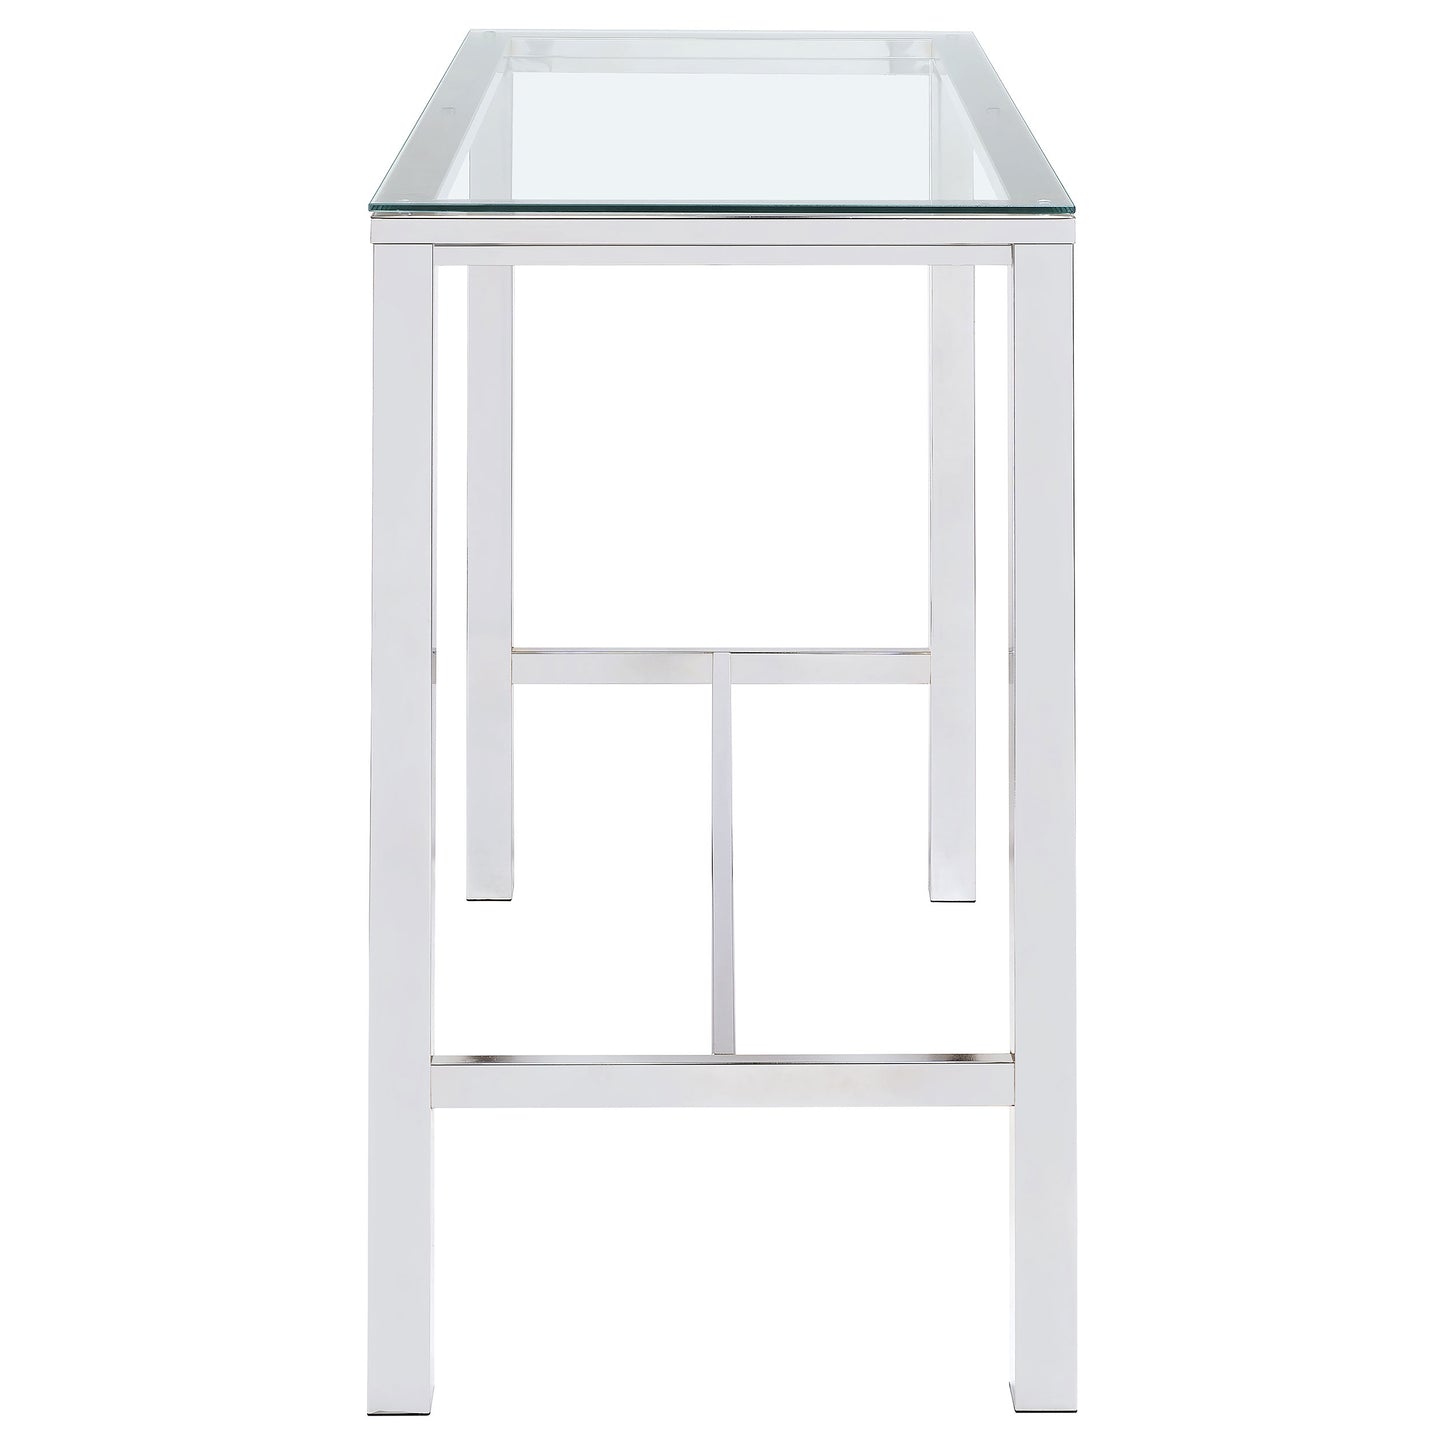 Tolbert Bar Table with Glass Top Chrome